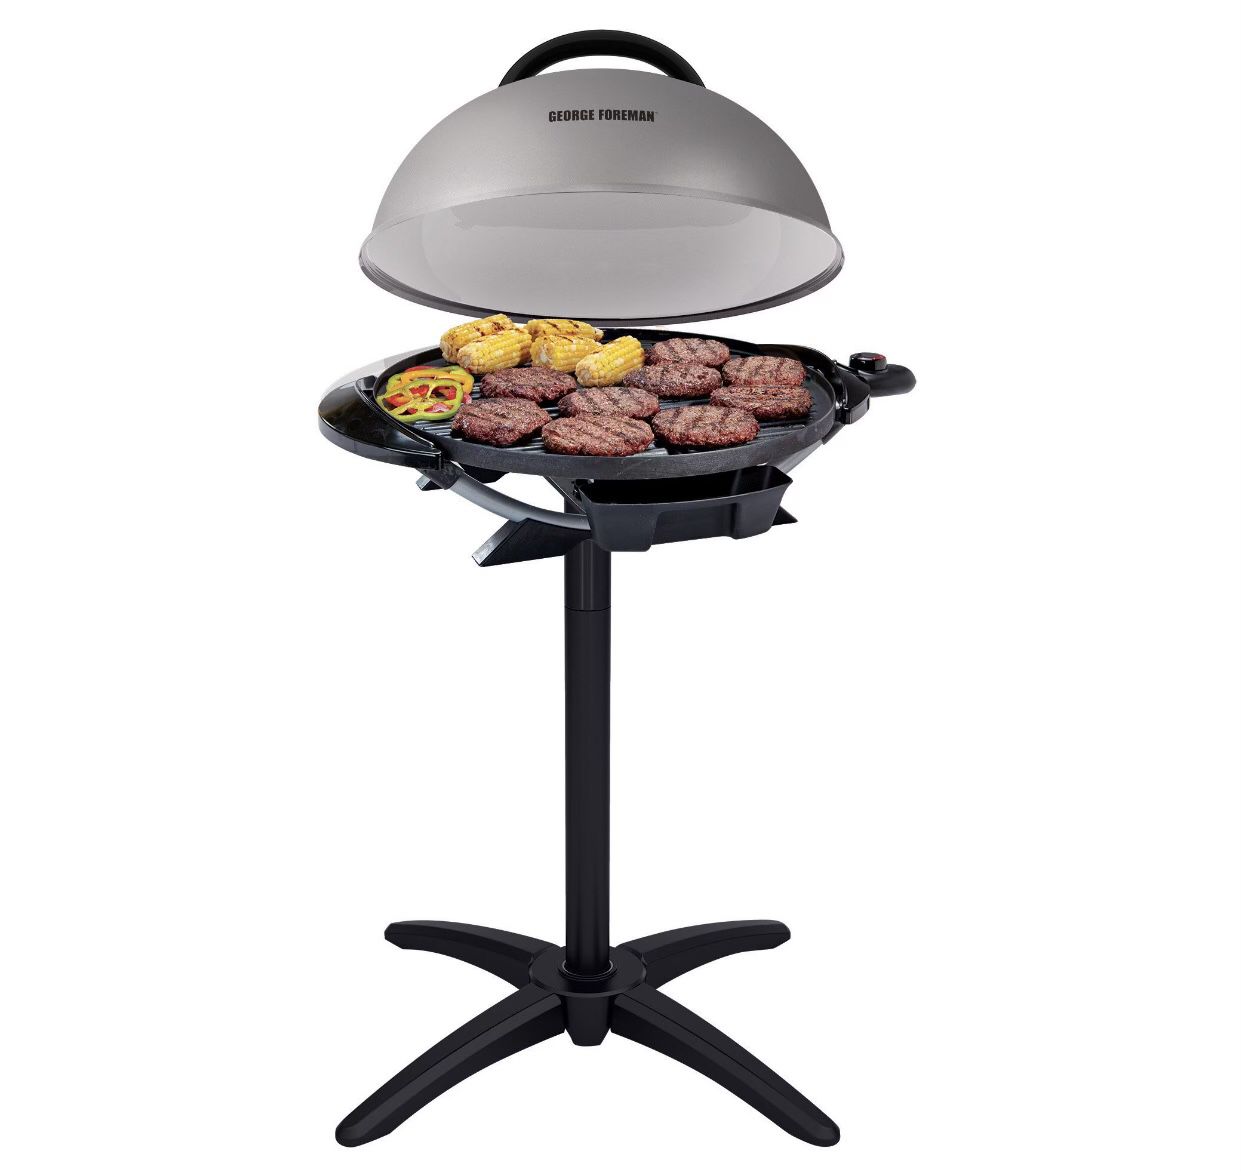 New Electric George Forman Grill 